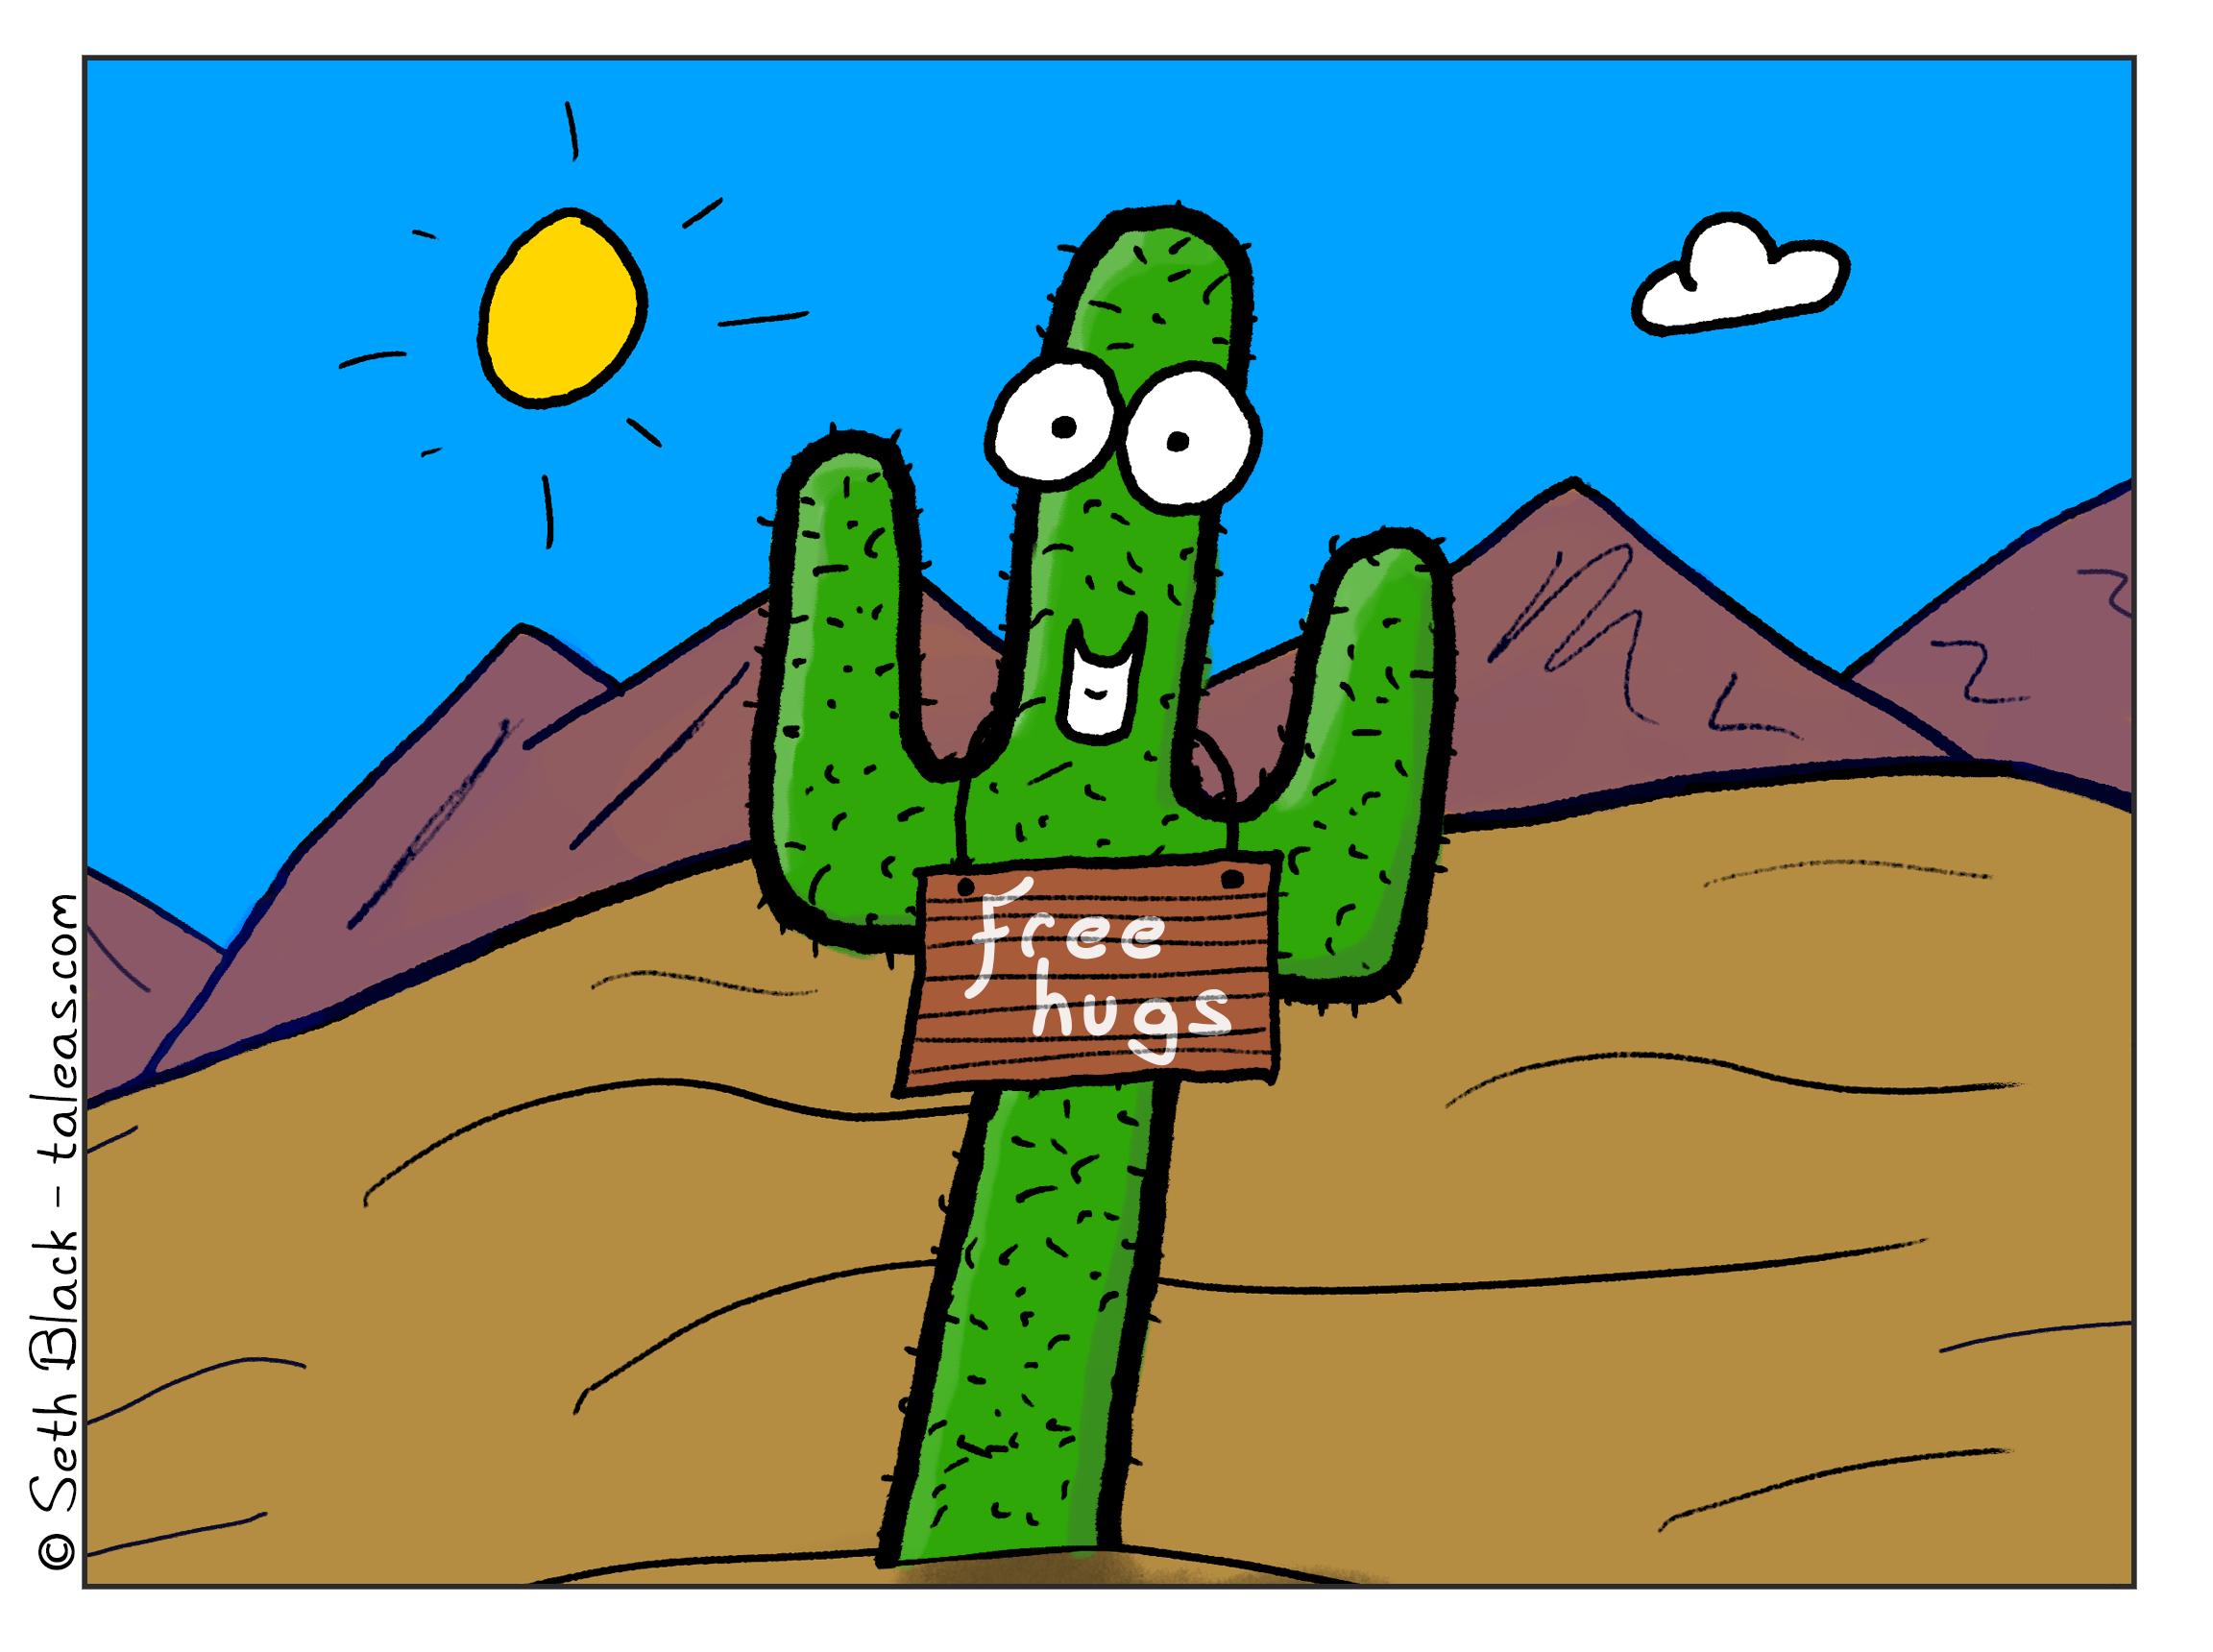 A saguaro cactus stands in the middle of the Arizona desert holding a sign, "free hugs".